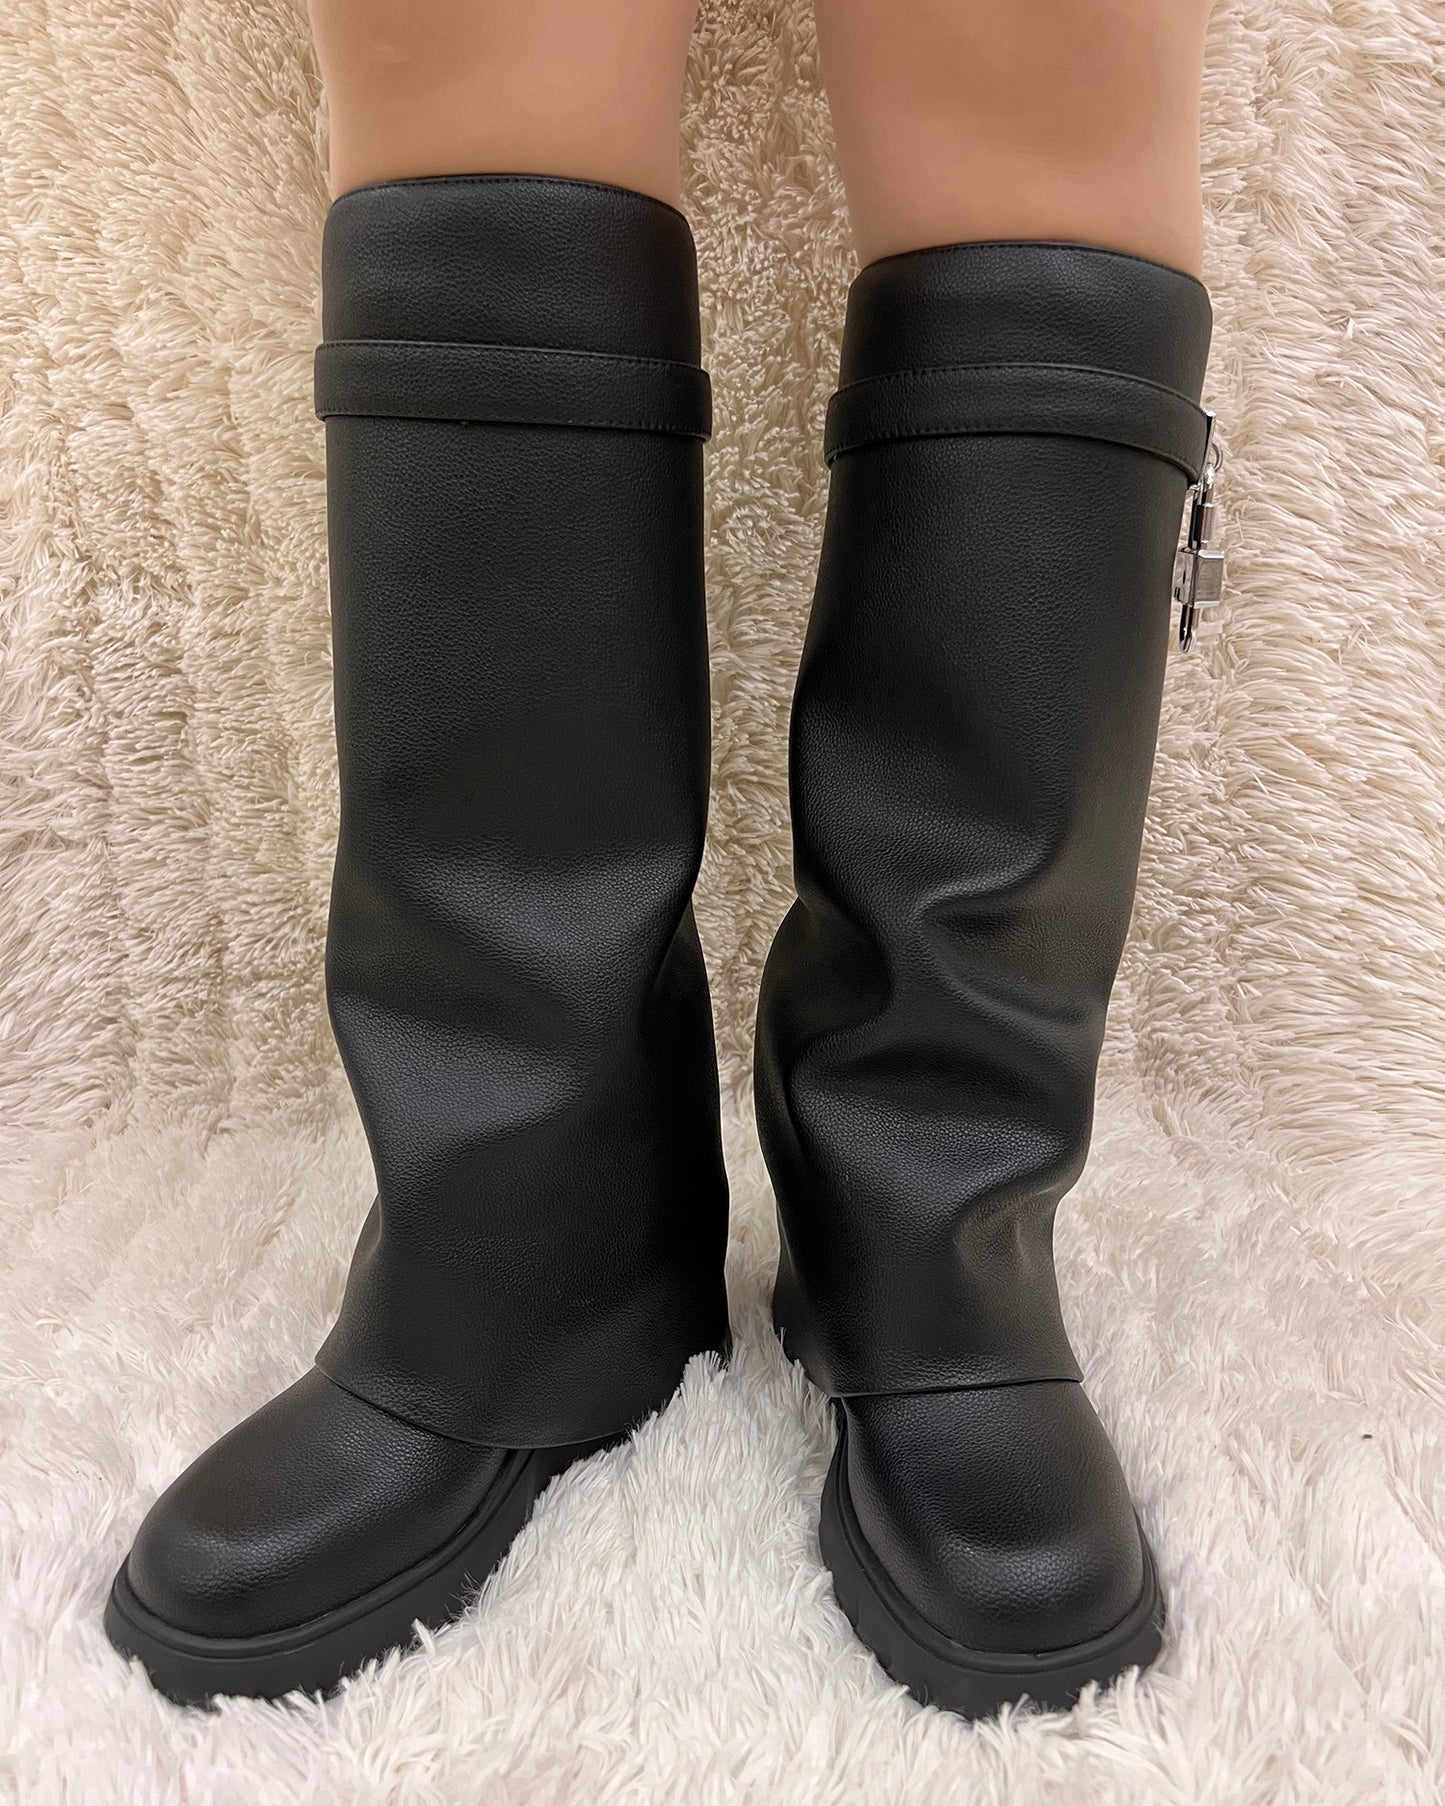 Wedge Leather Pants Lock Knee High Boots For Women